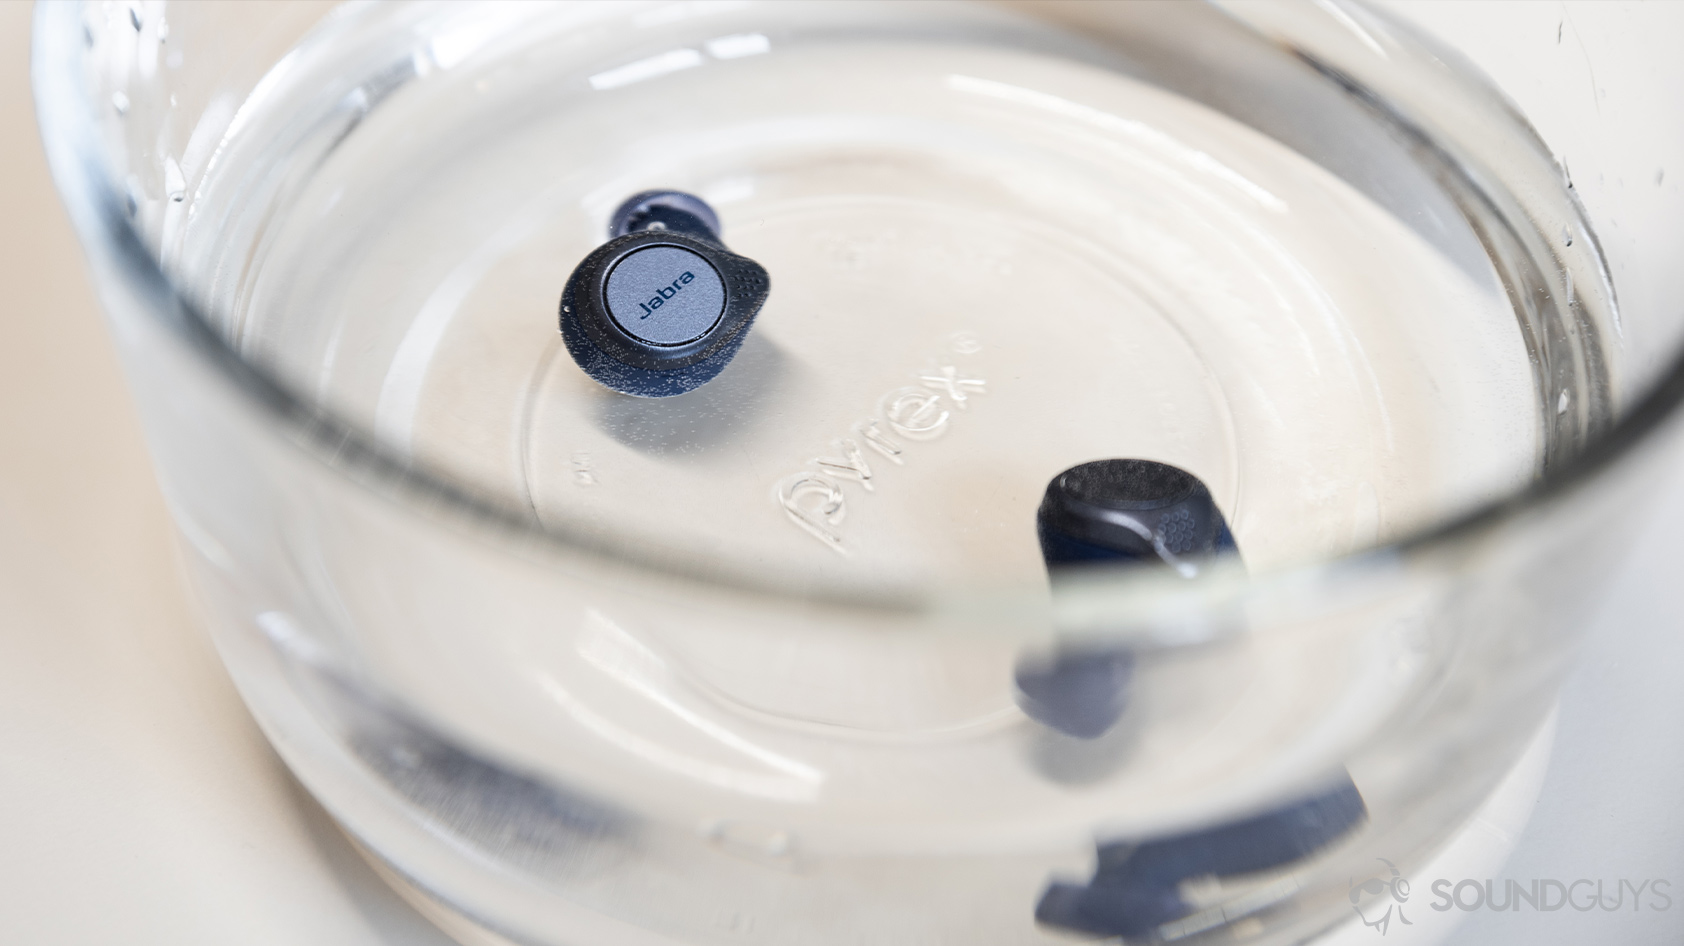 A picture of the Jabra Elite Active 75t true wireless workout earbuds (navy) submerged in a Pyrex bowl of water.